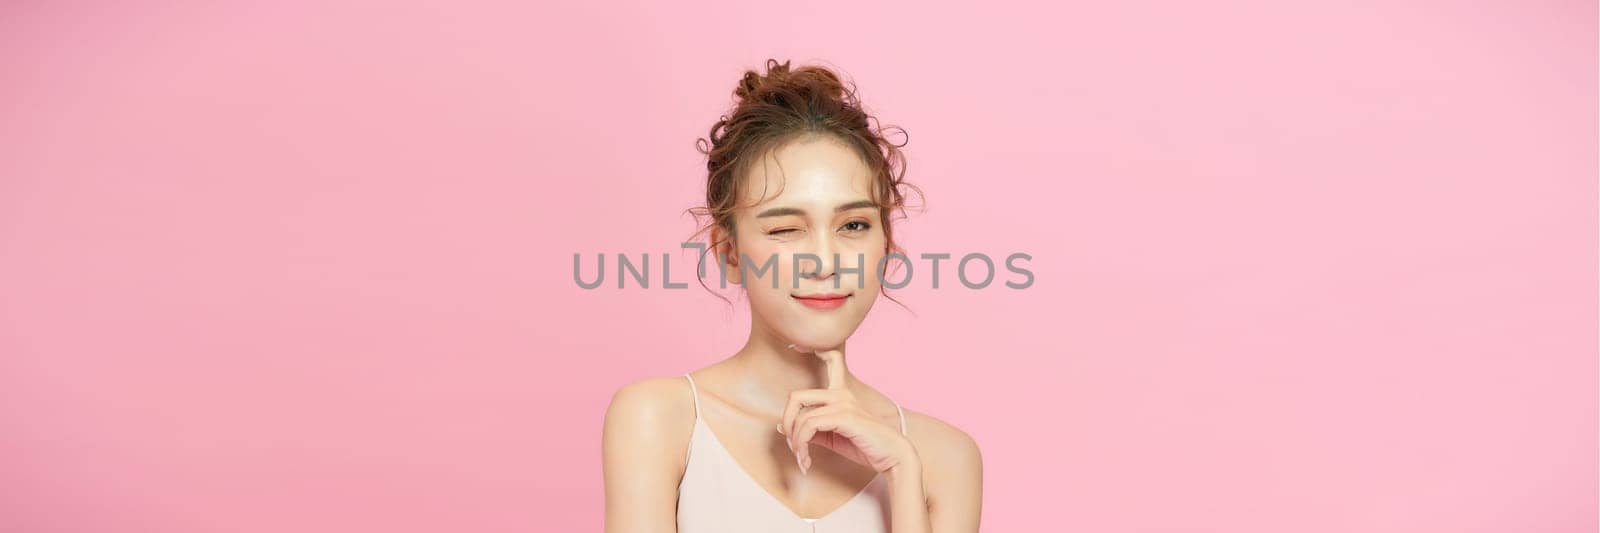 Casual beauty concept of pretty Asian girl on pink background